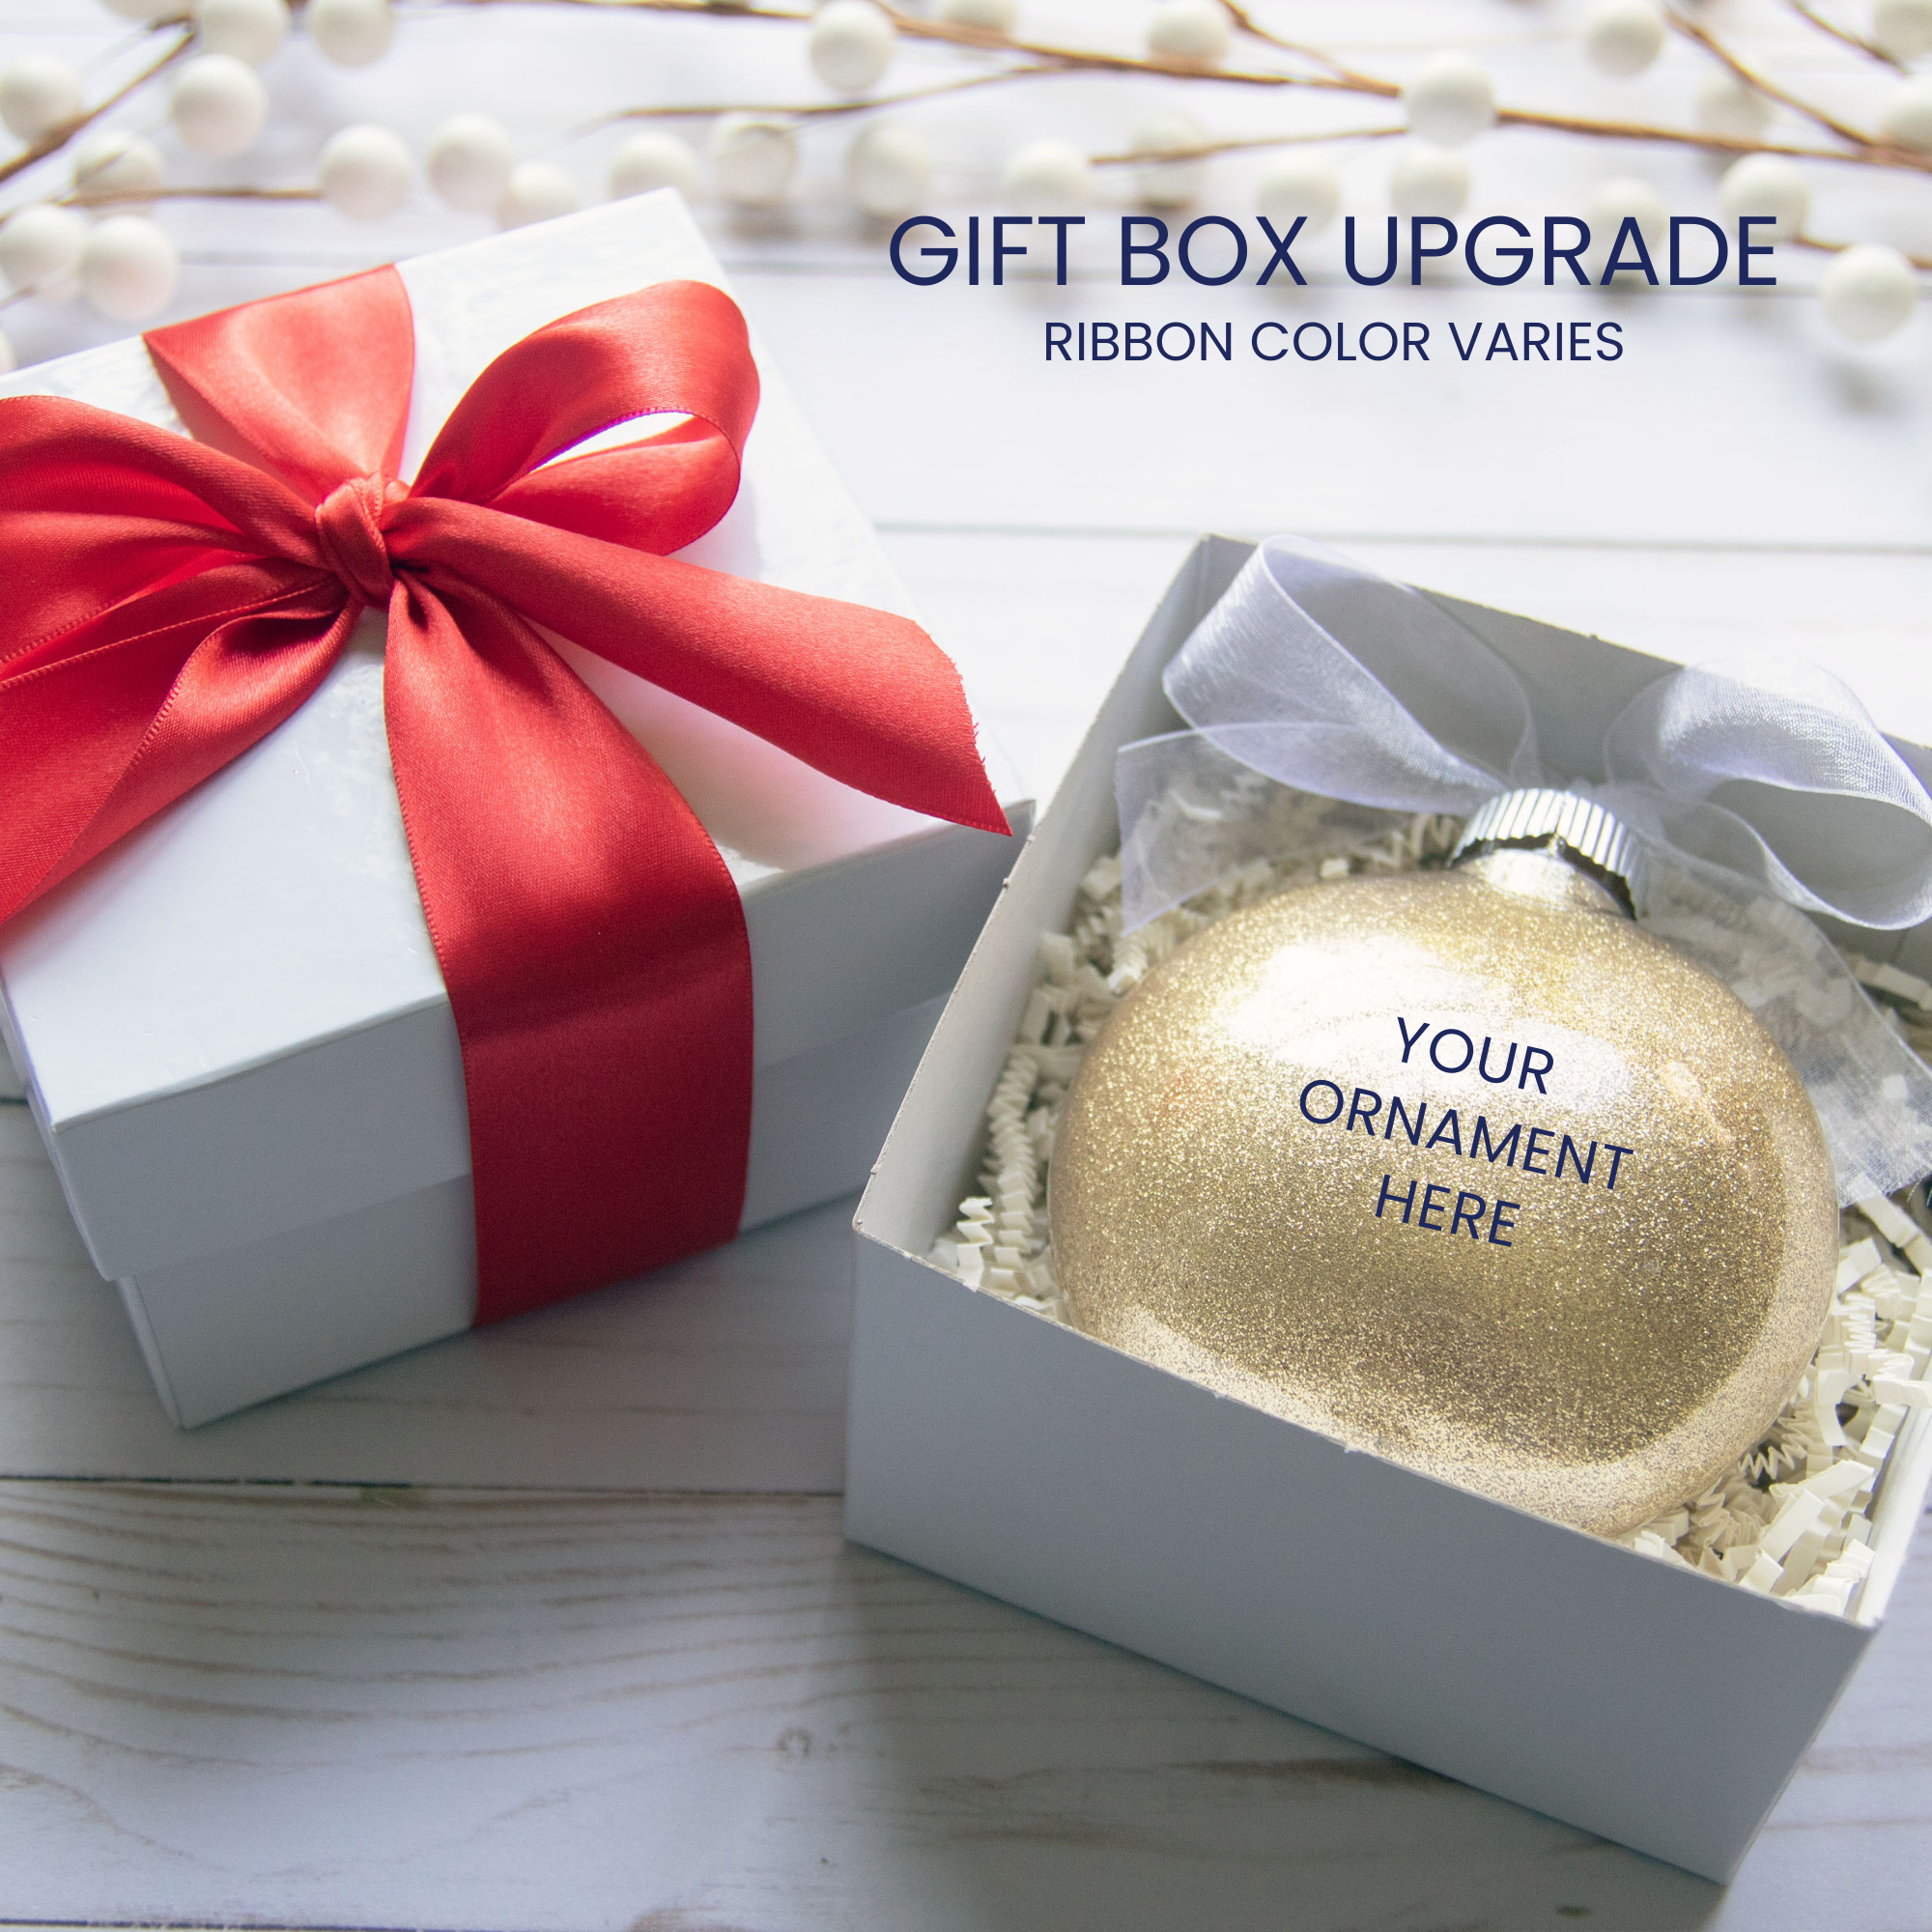 Gift box upgrade available. Ribbon color varies. Gift box with red double satin ribbon tied in a bow. Open gift box showing where ornament is placed.